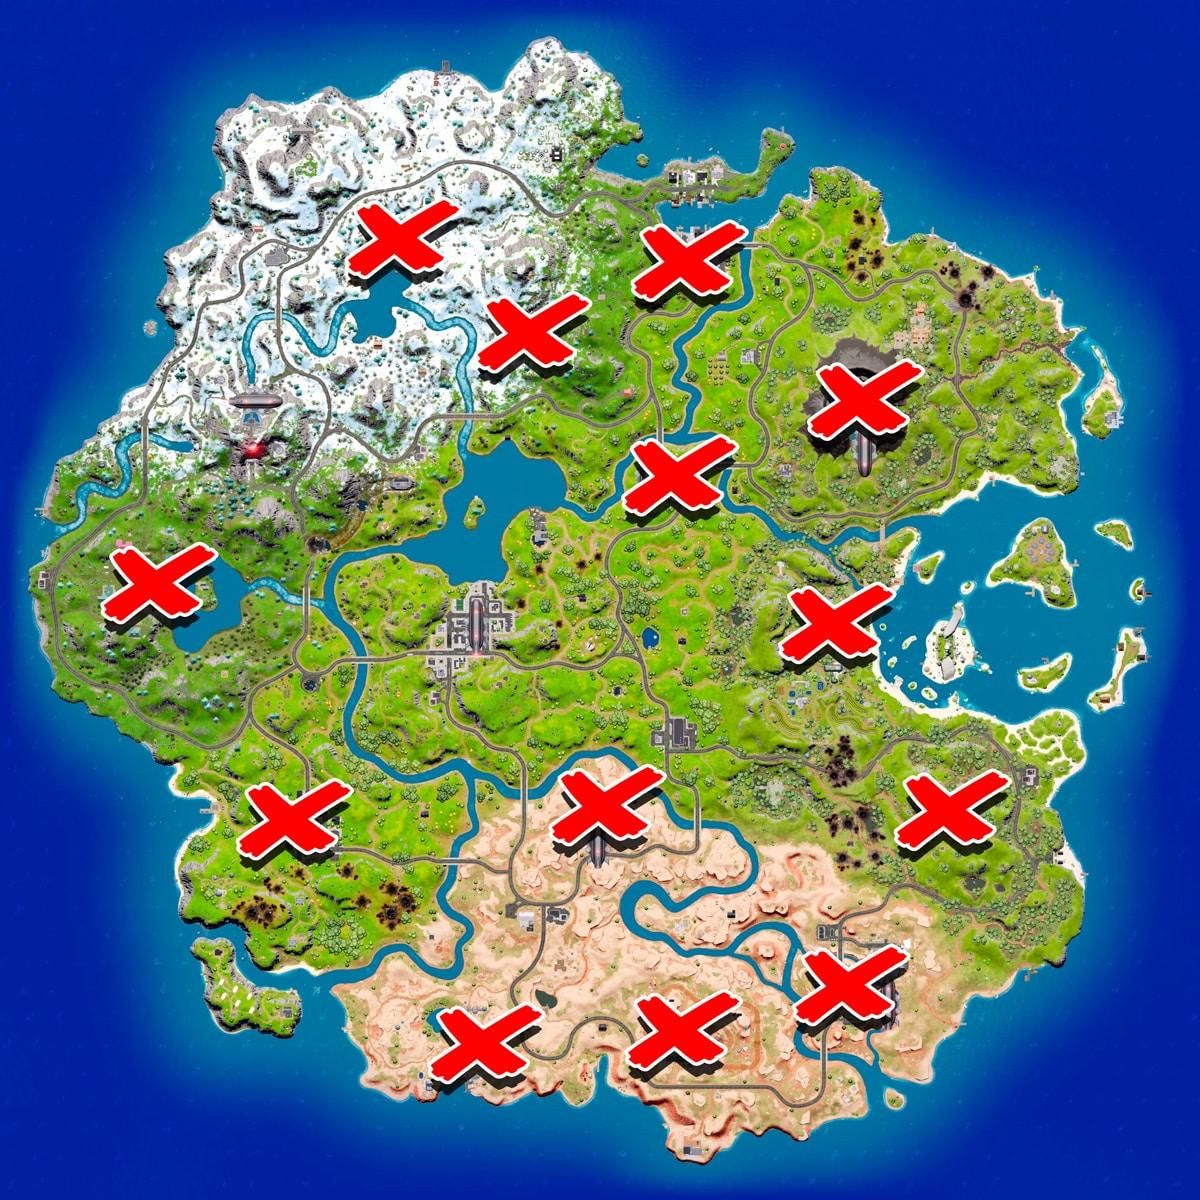 Vending Machine locations marked on the Fortnite map